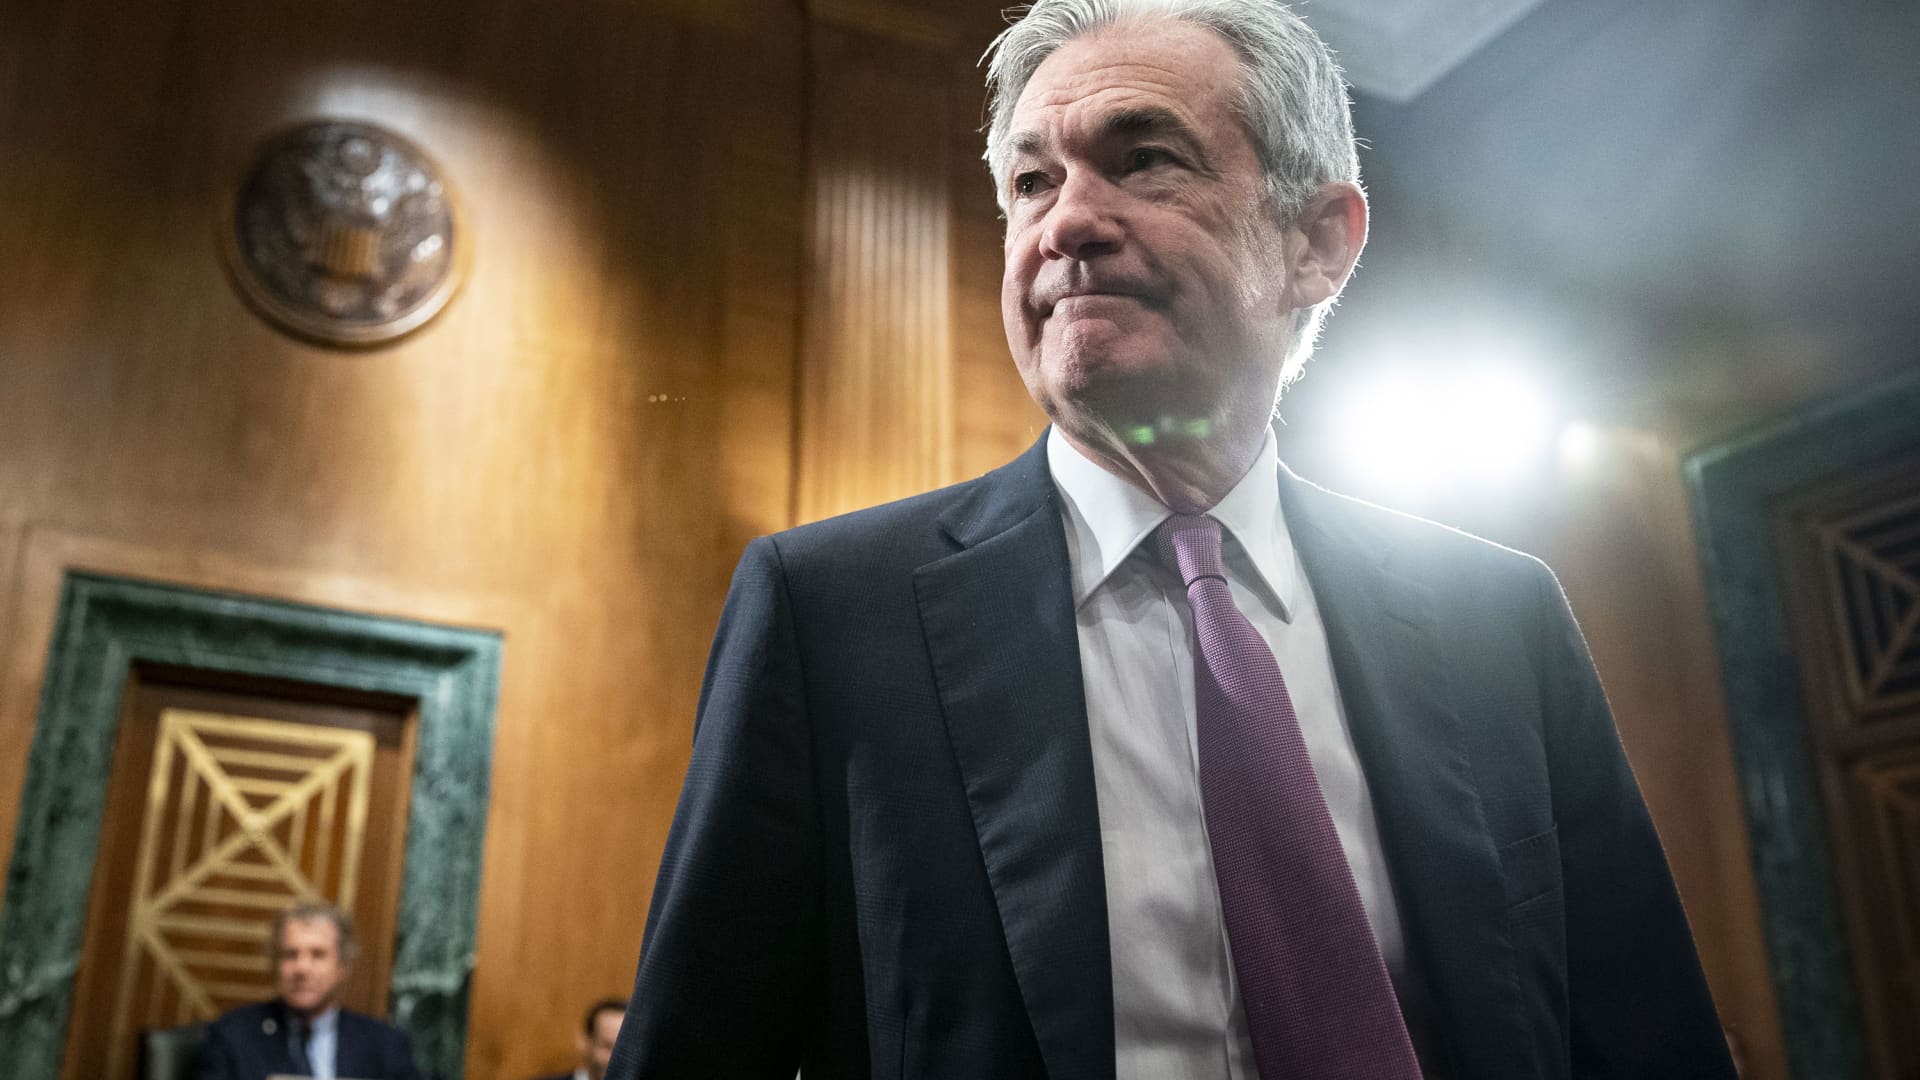 Jerome Powell, chairman of the U.S. Federal Reserve, arrives for a Senate Banking Committee hearing in Washington, D.C., on Thursday, July 15, 2021.